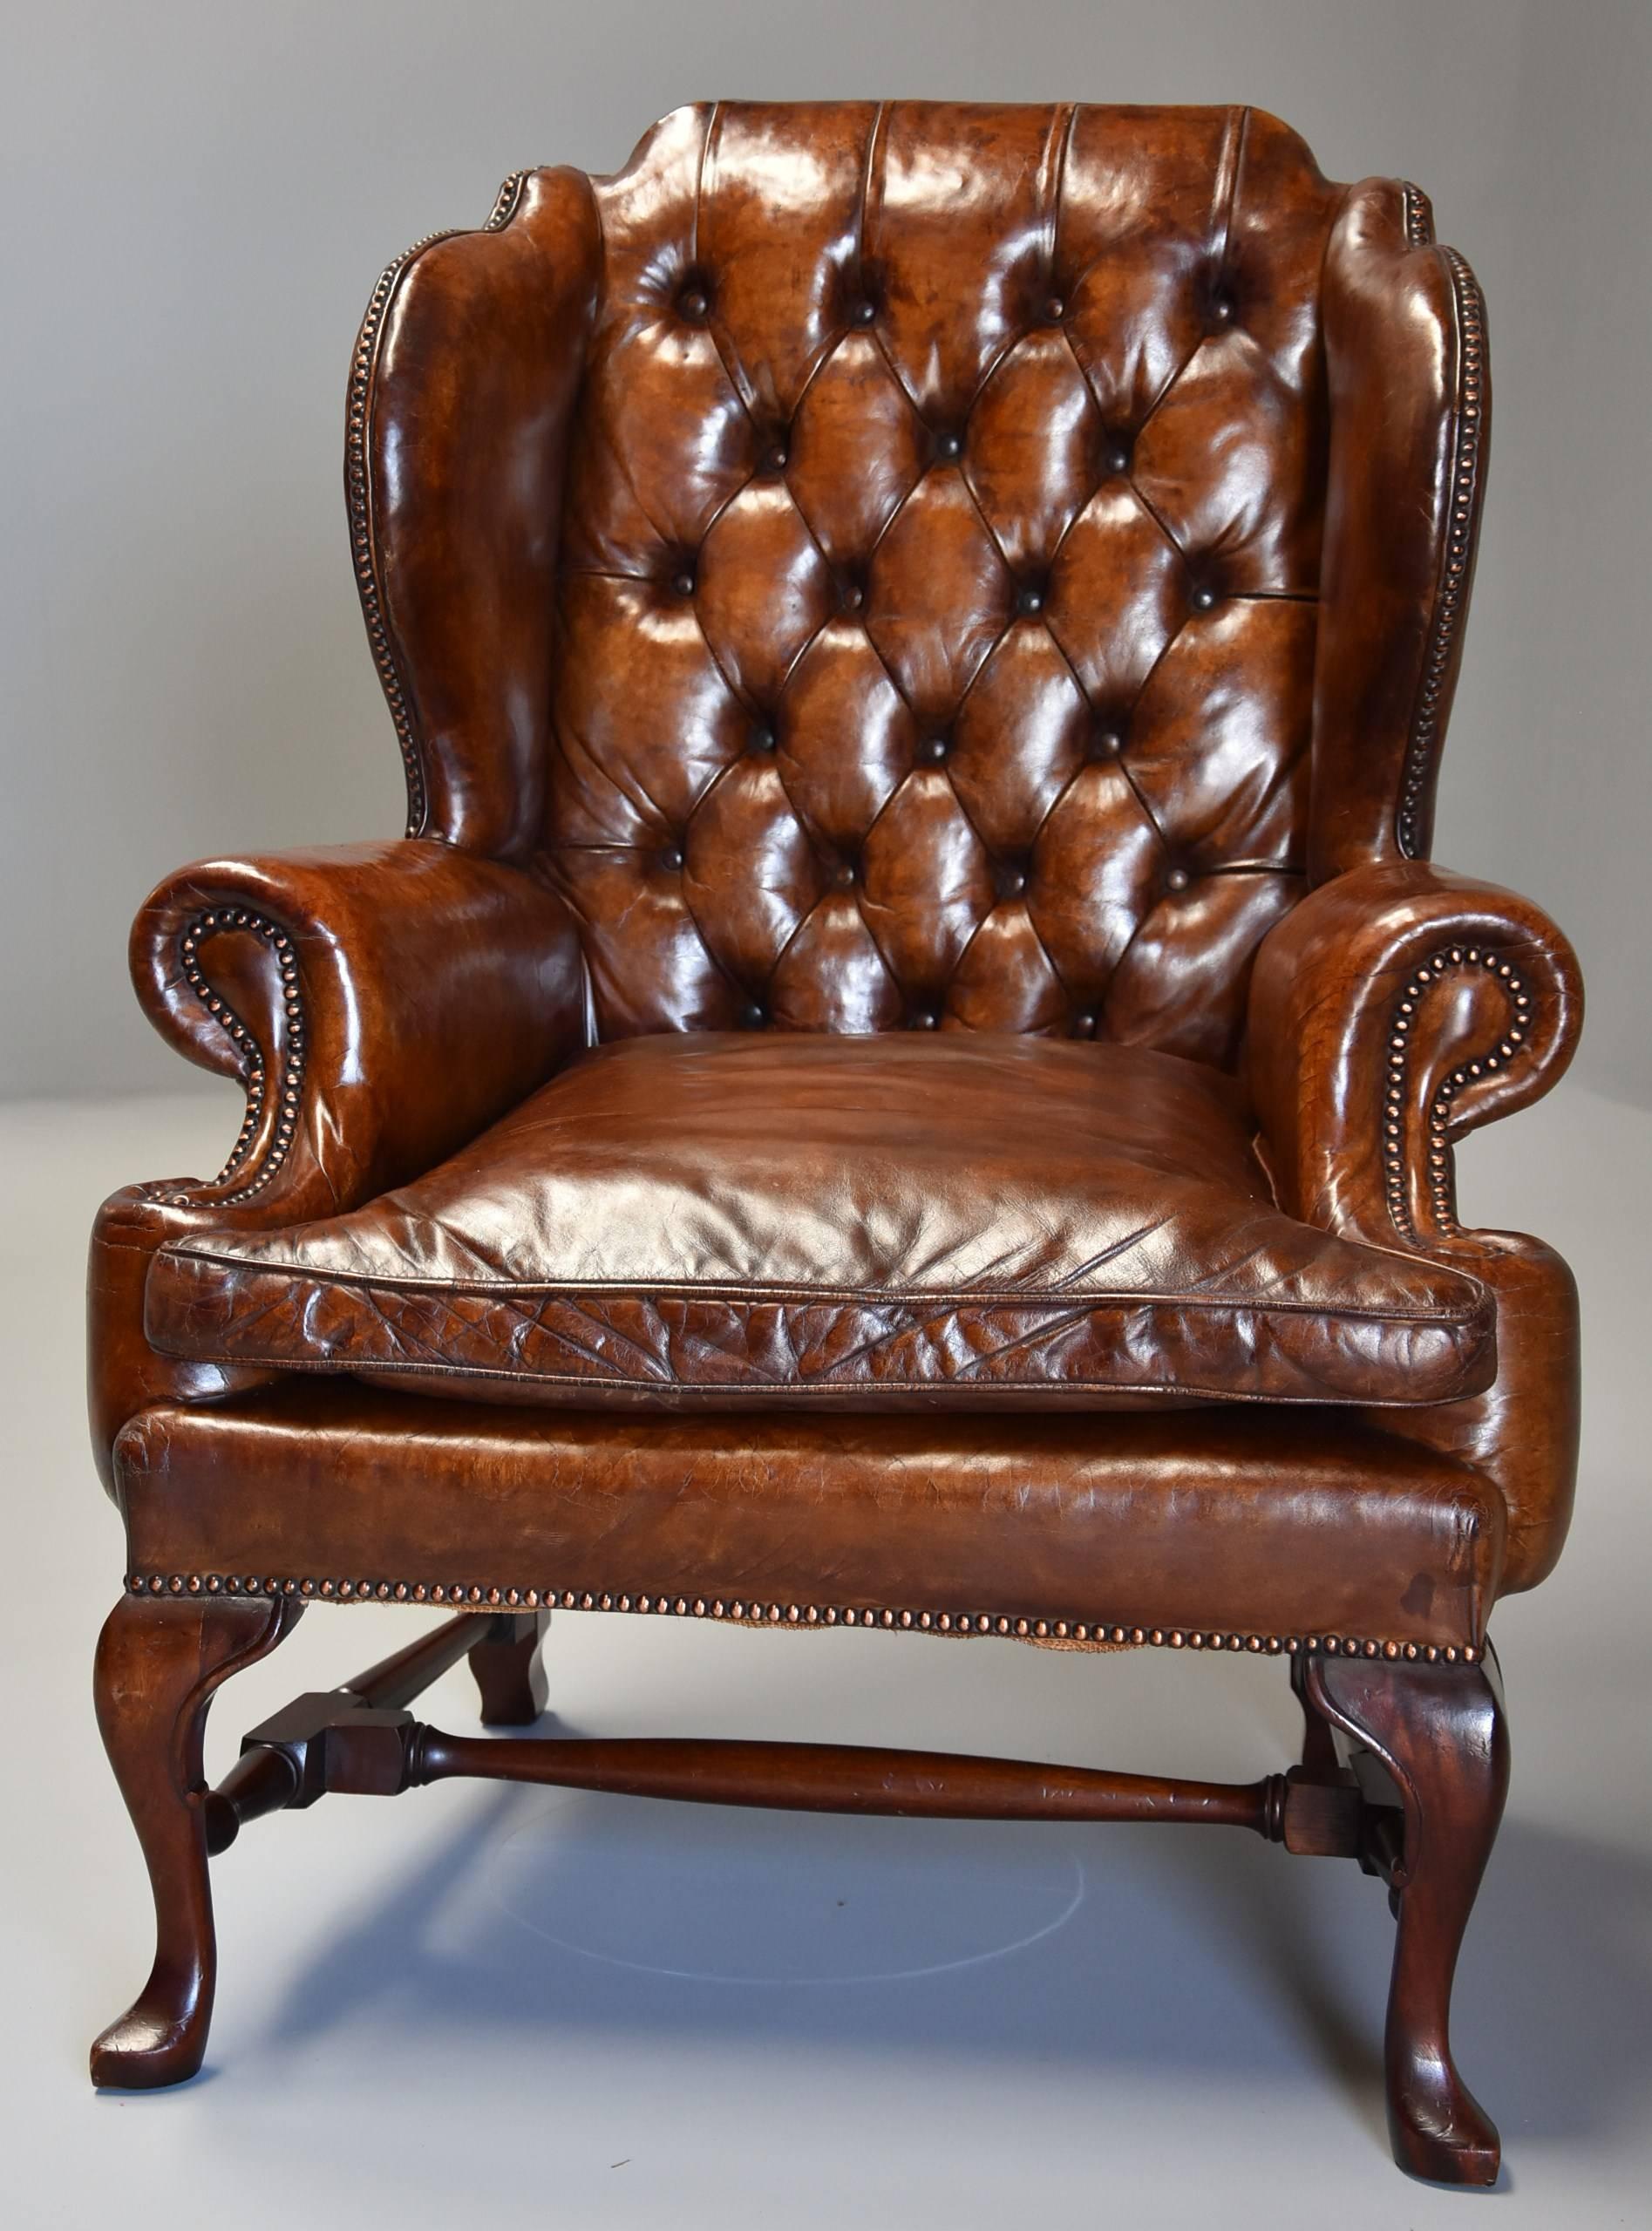 Early 20th century Georgian style deep buttoned brown leather wing armchair.

This superb chair consists of a deep buttoned back with 'wings' to the top with a leather loose seat cushion, the chair retaining original hand dyed brown leather in